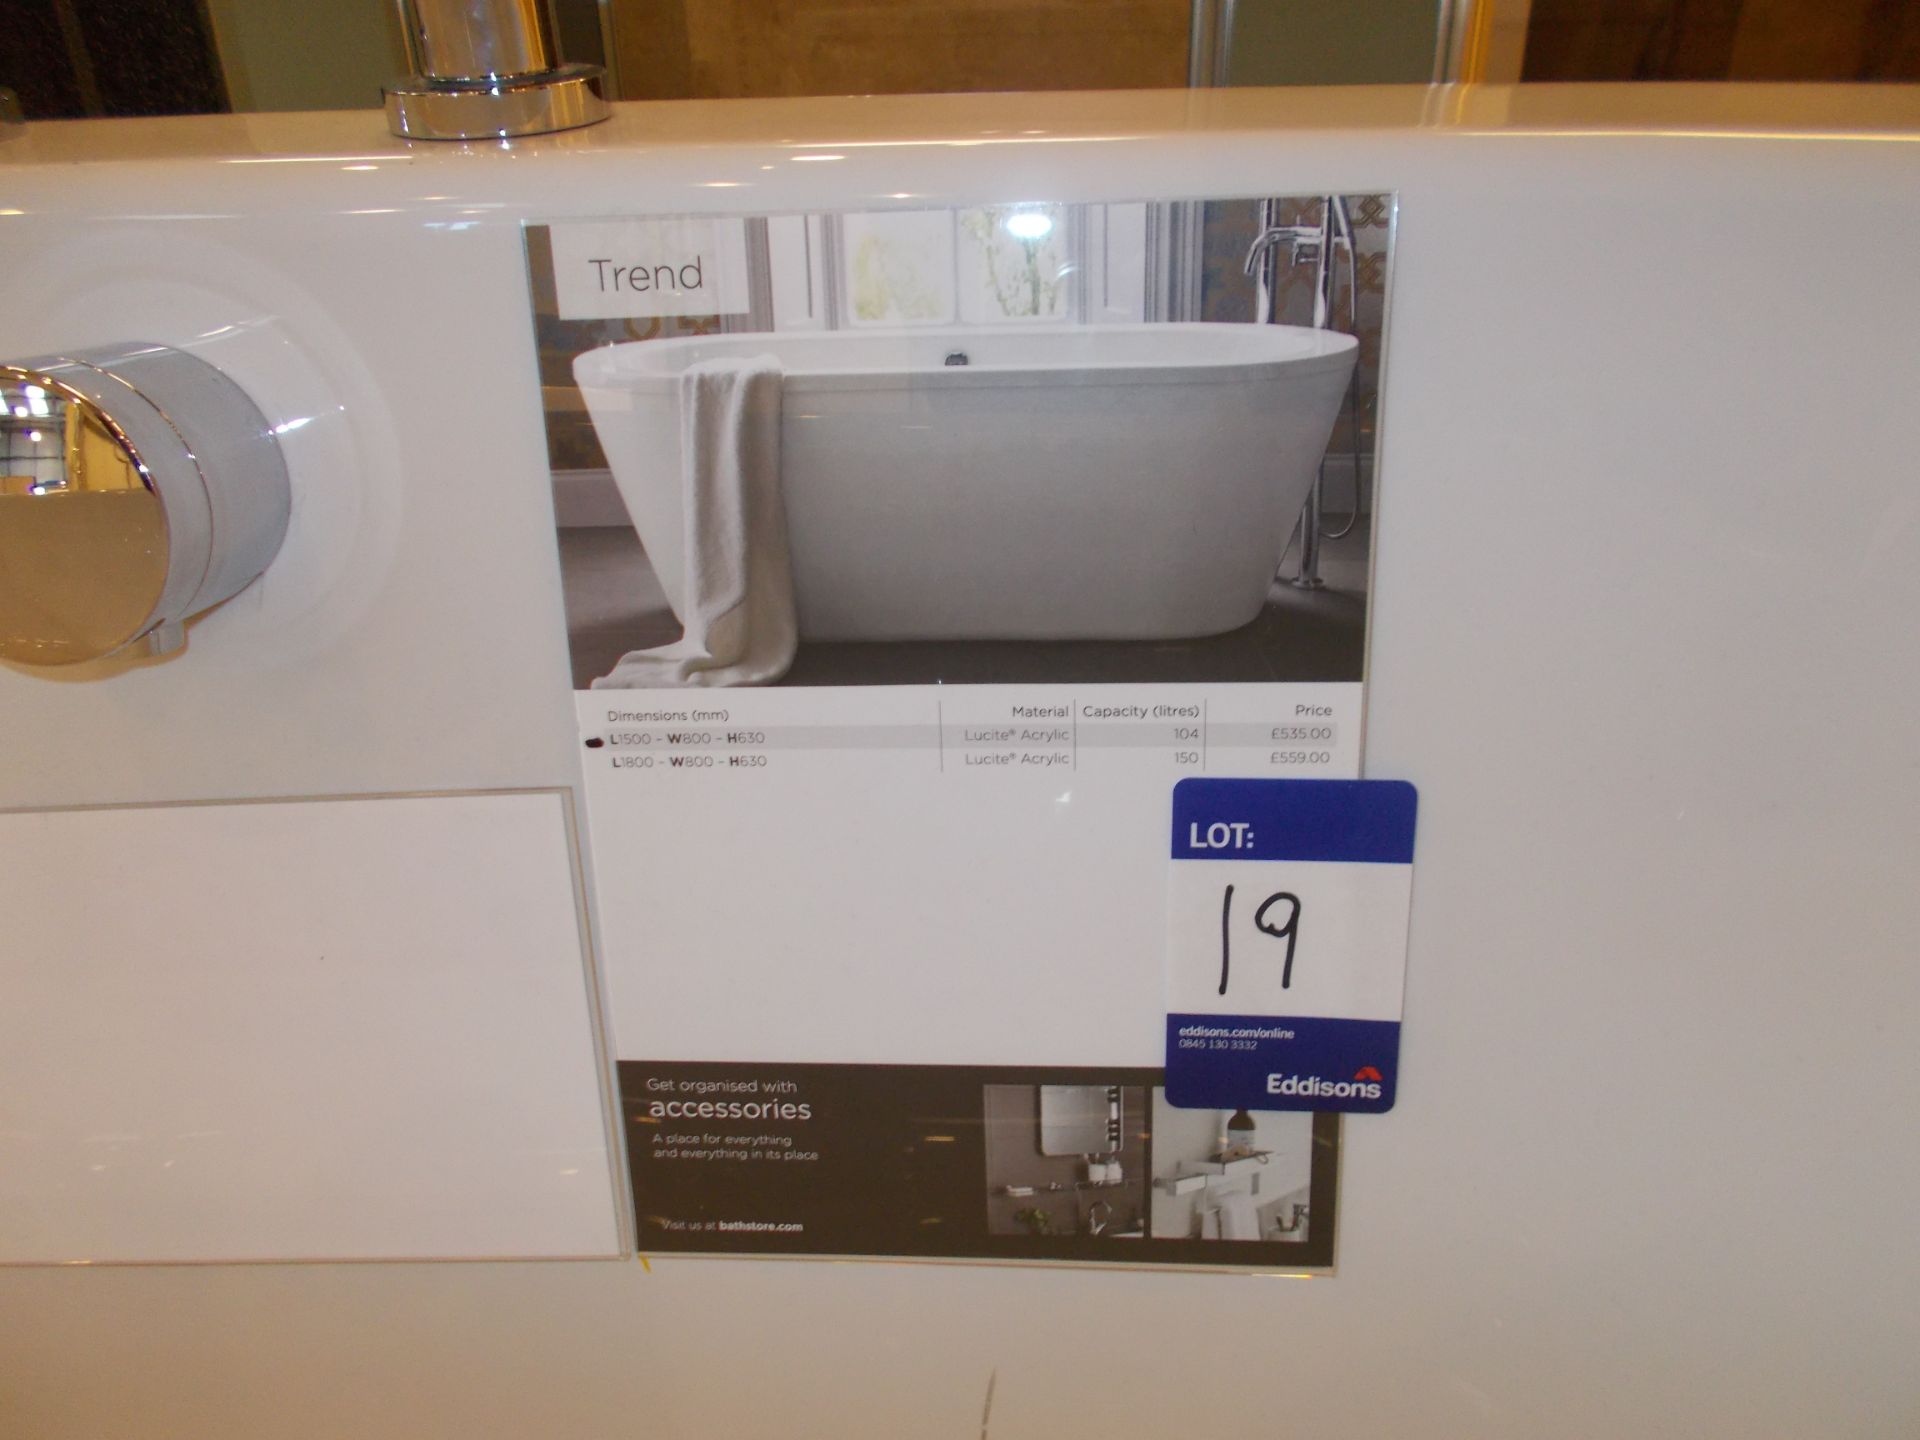 Trend 1500 freestanding bath, with 104 litre capacity. RRP £635 - Image 2 of 2